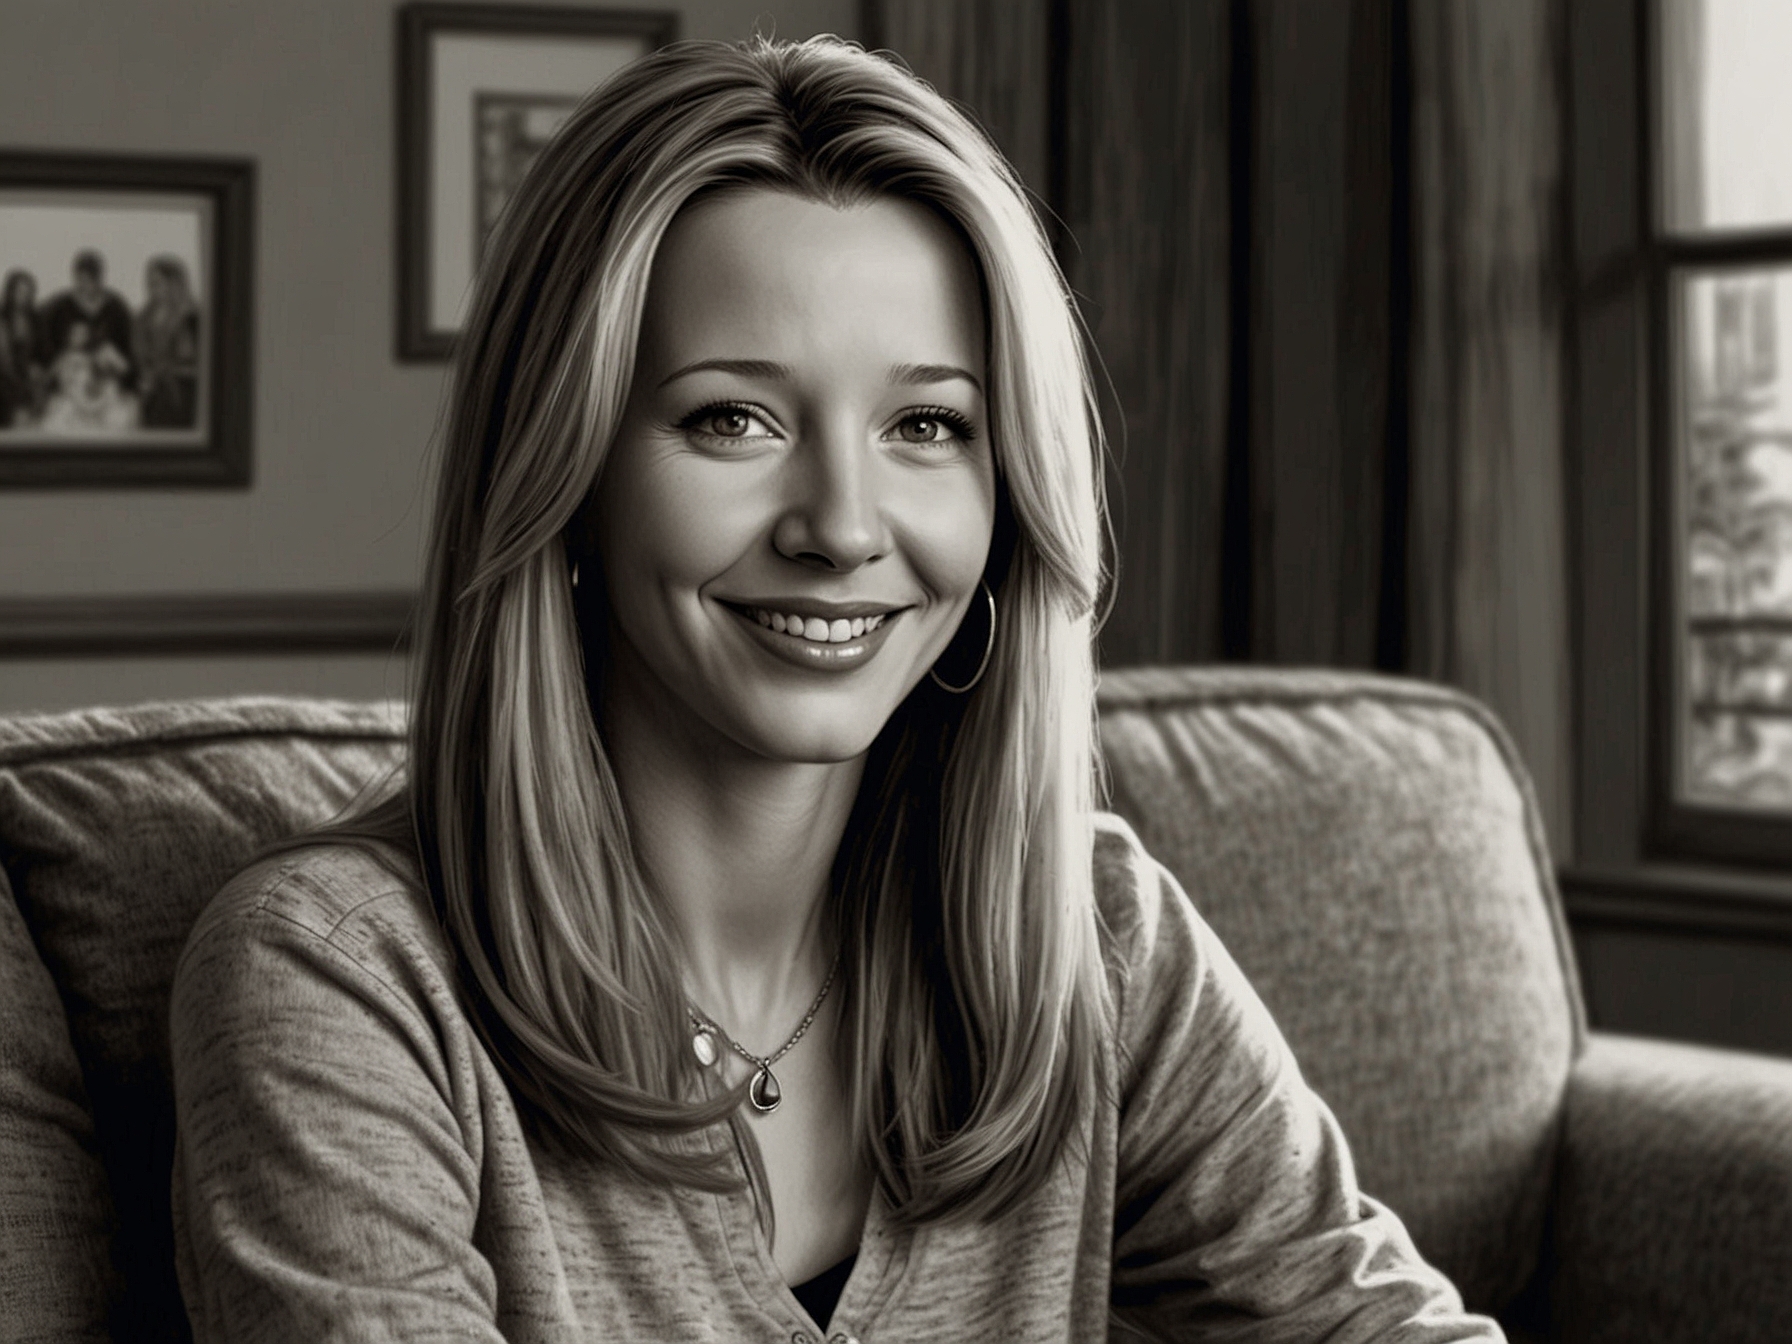 Lisa Kudrow, smiling, watches television with an emotional expression, representing her heartfelt decision to rewatch 'Friends' in honor of Matthew Perry.